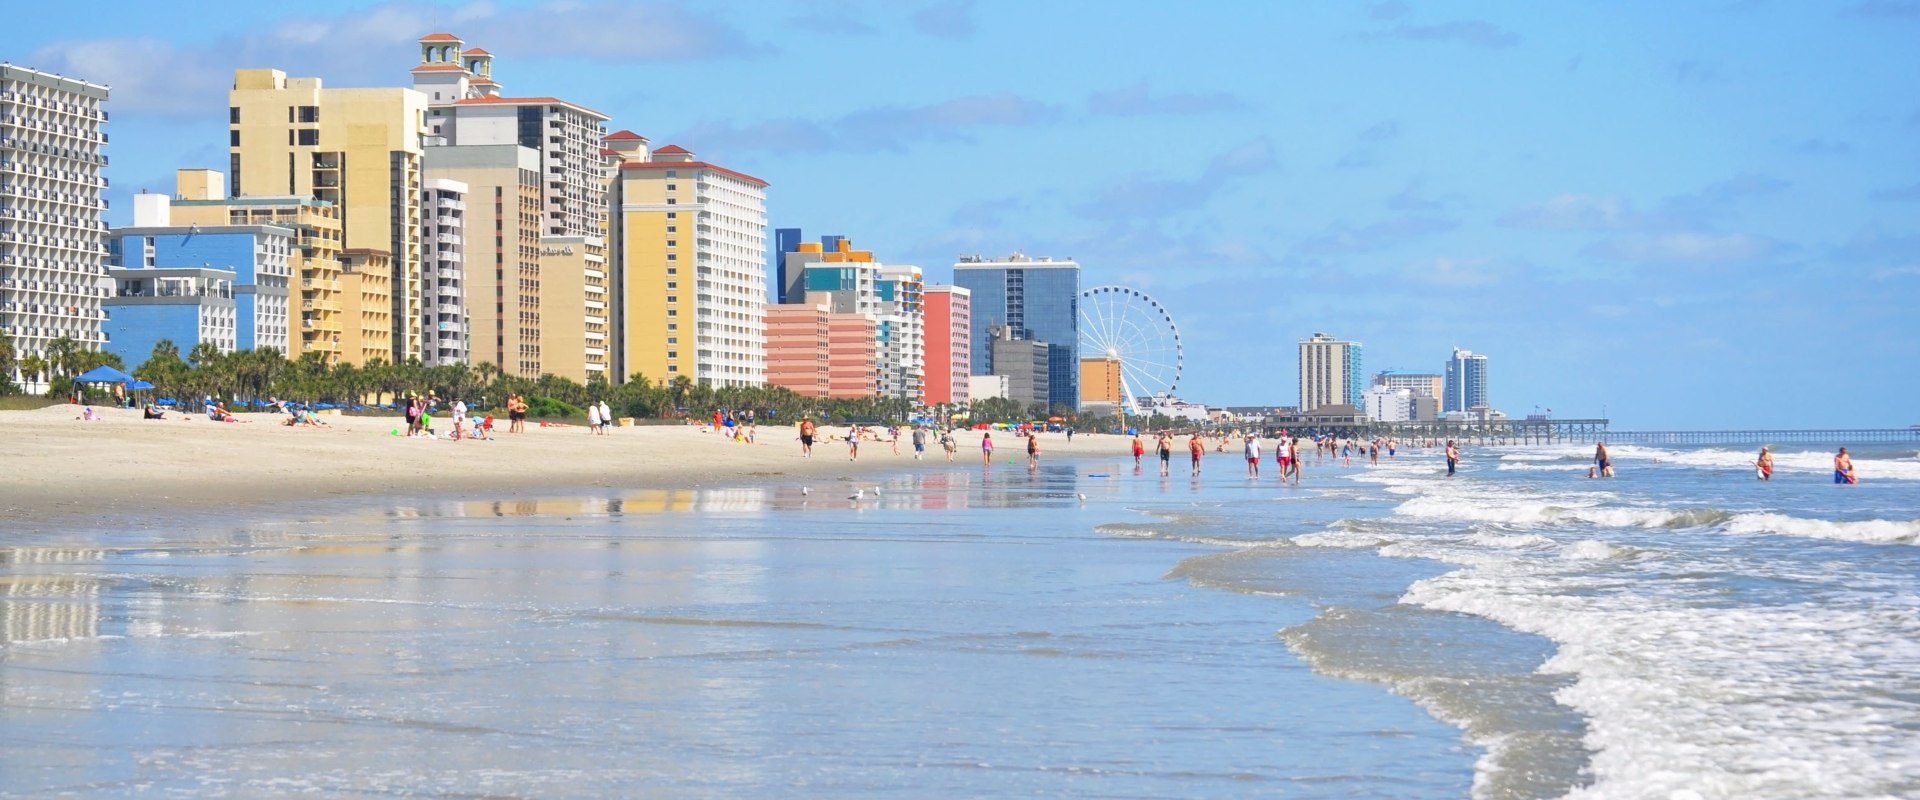 What is the most popular part of myrtle beach?